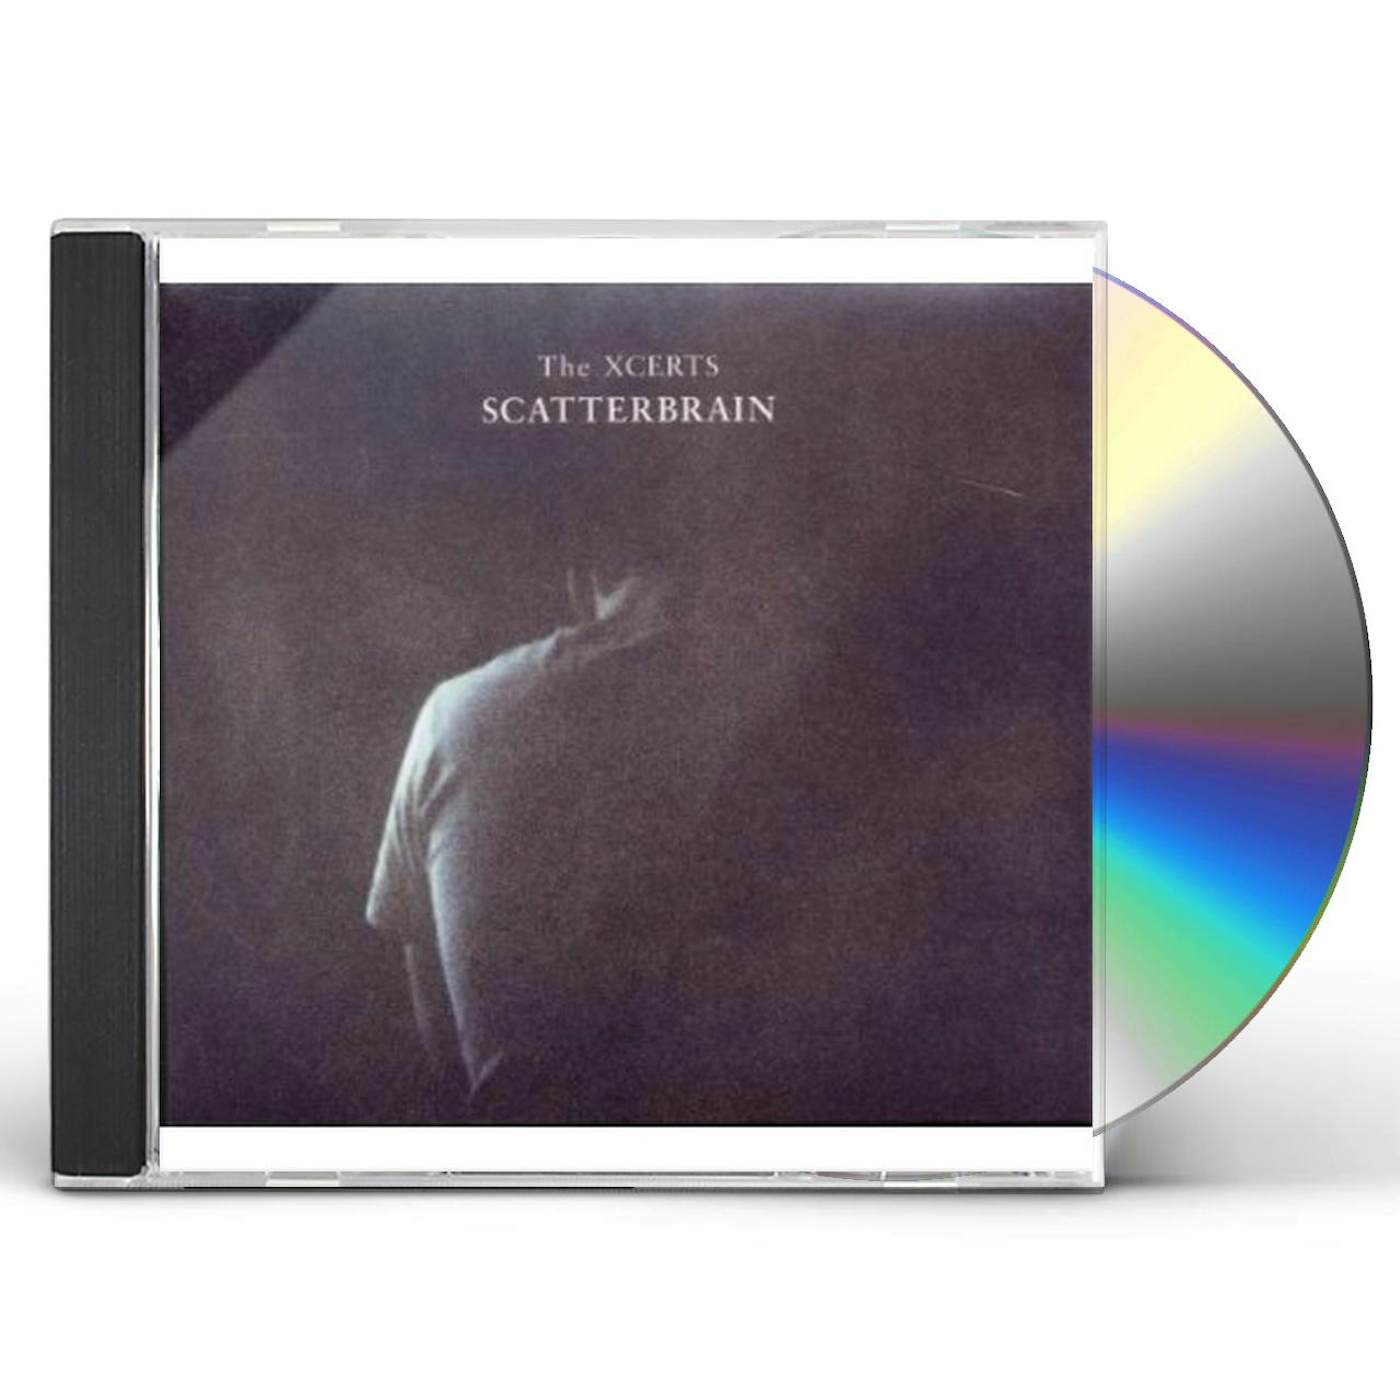 The XCERTS SCATTERBRAIN CD